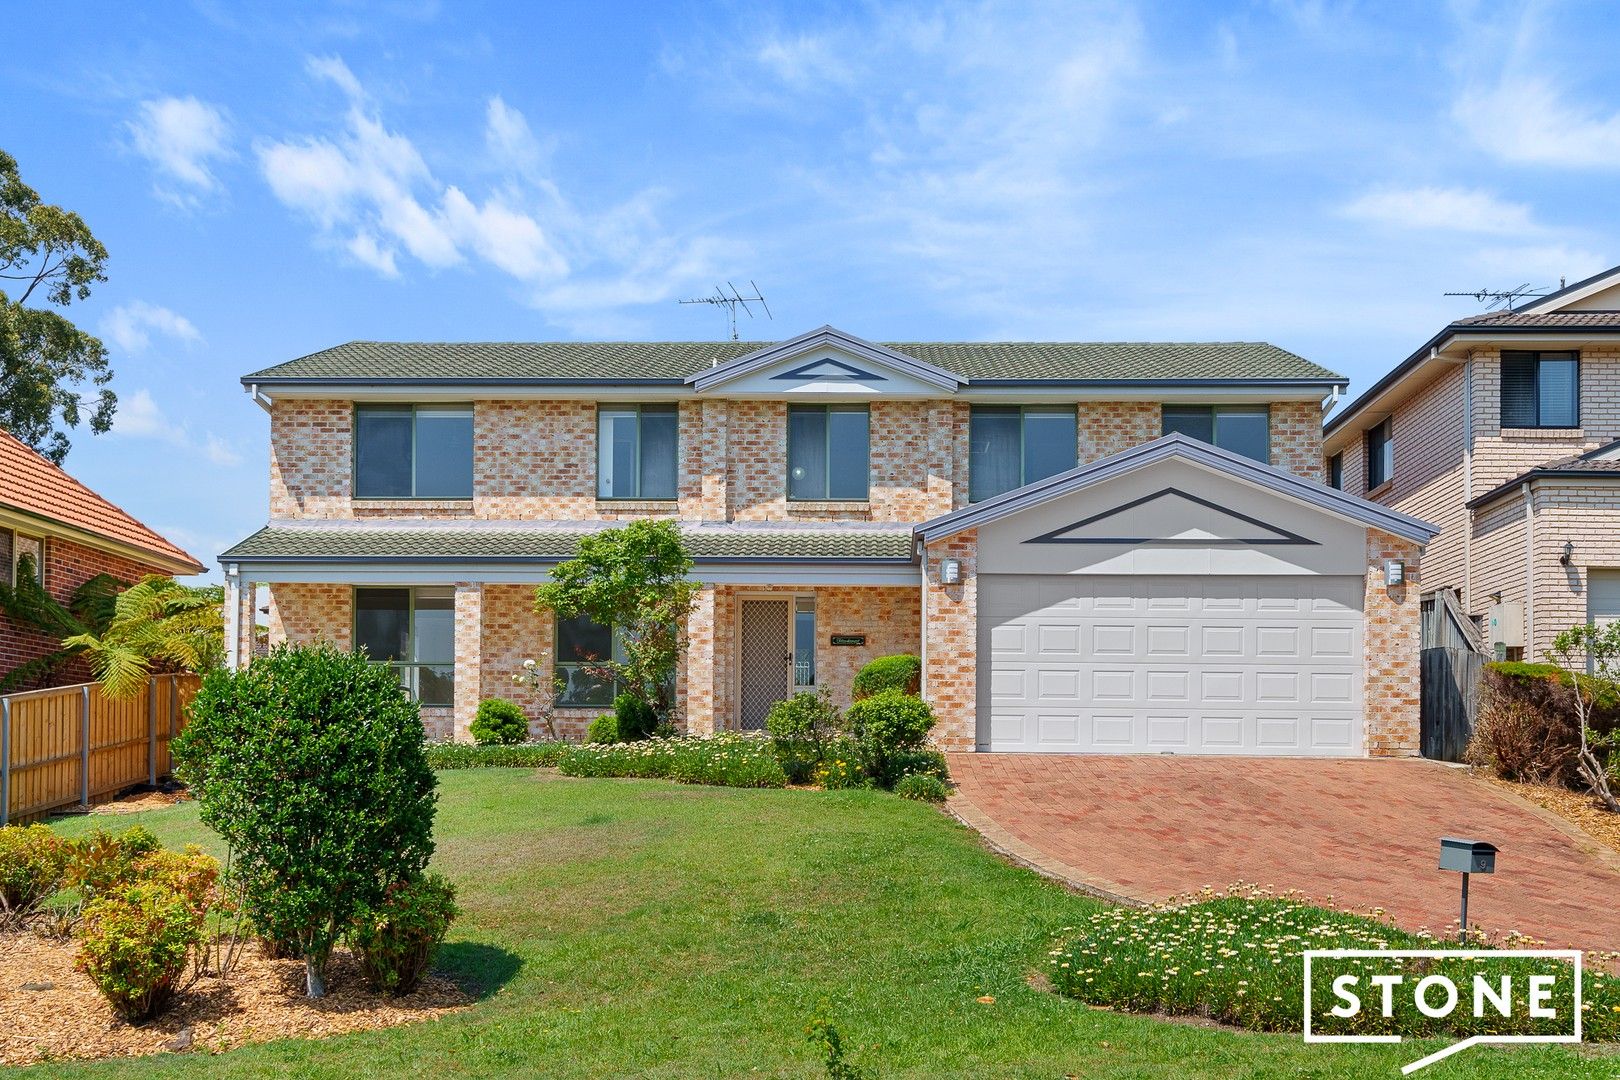 4 bedrooms House in 9 Mowbray Close CASTLE HILL NSW, 2154